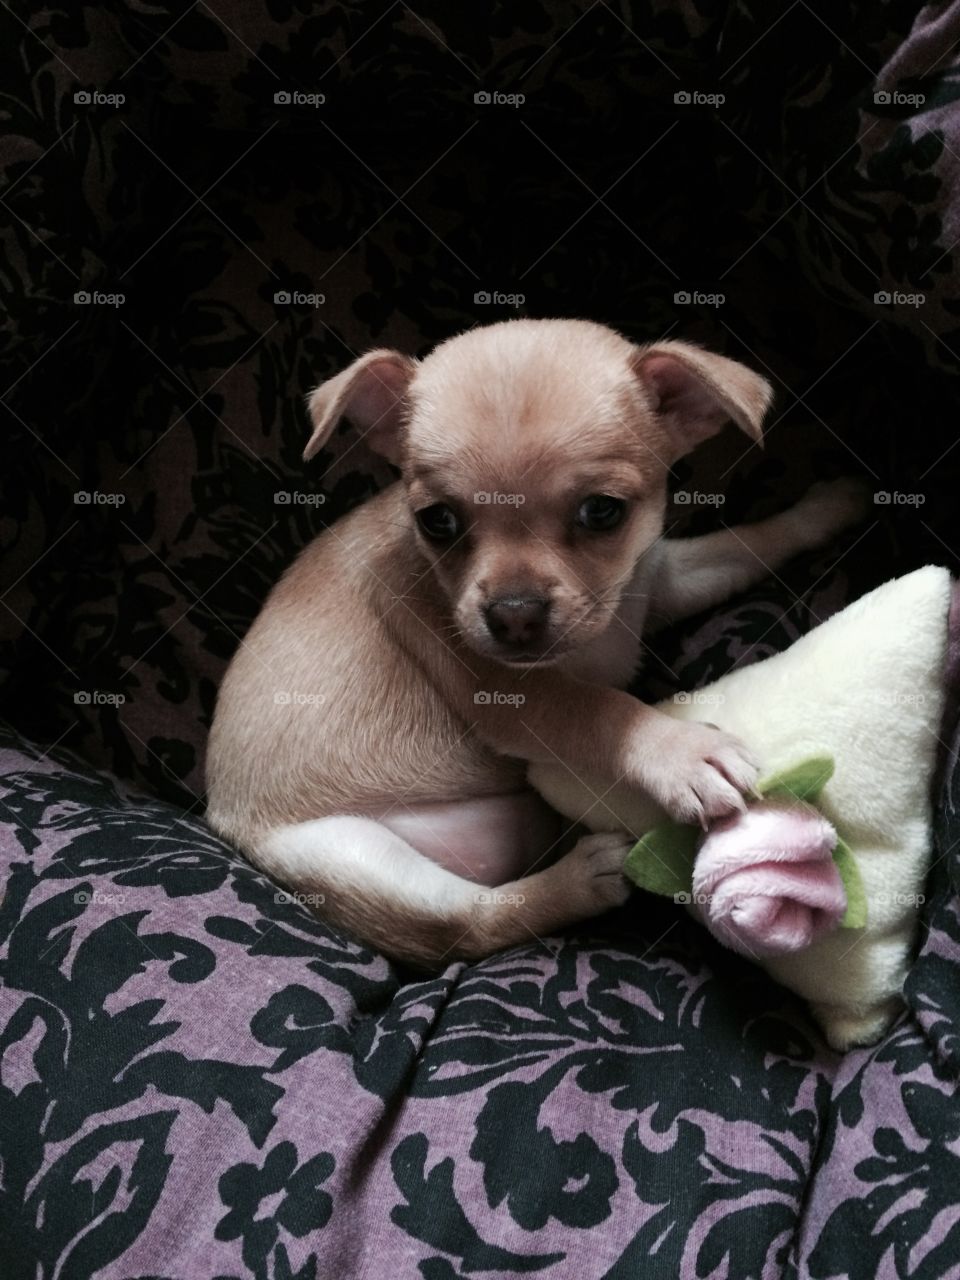 Marni the chihuahua puppy. This is a chihuahua puppy I bred called Marni, KC registered